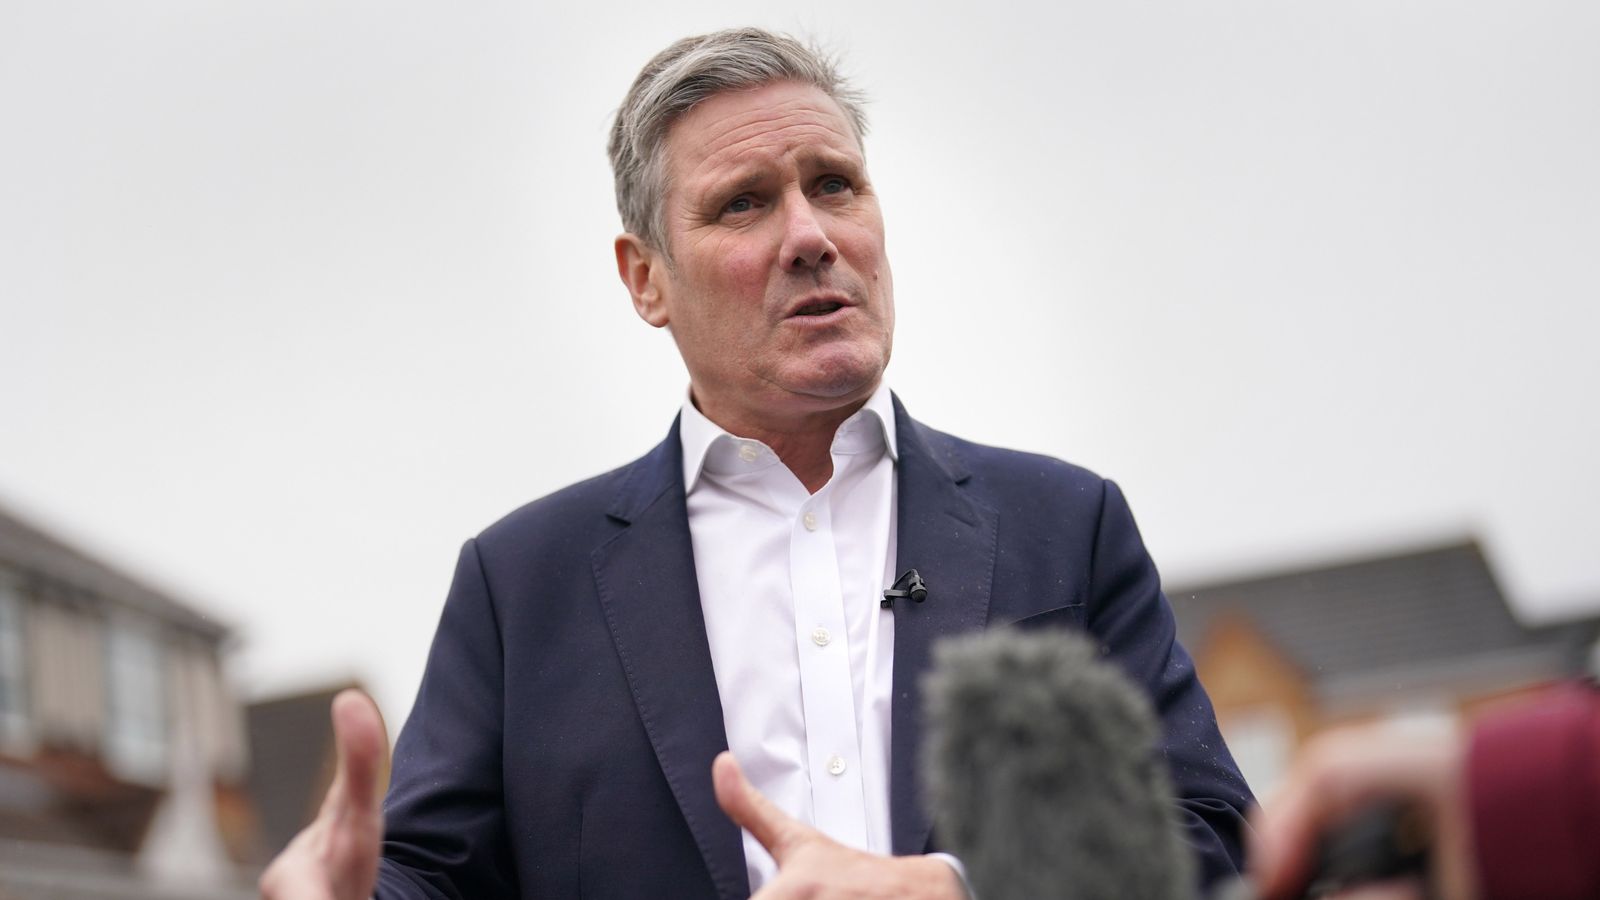 ULEZ: Sir Keir Starmer told to 'get off the fence' and challenge Sadiq Khan after court victory